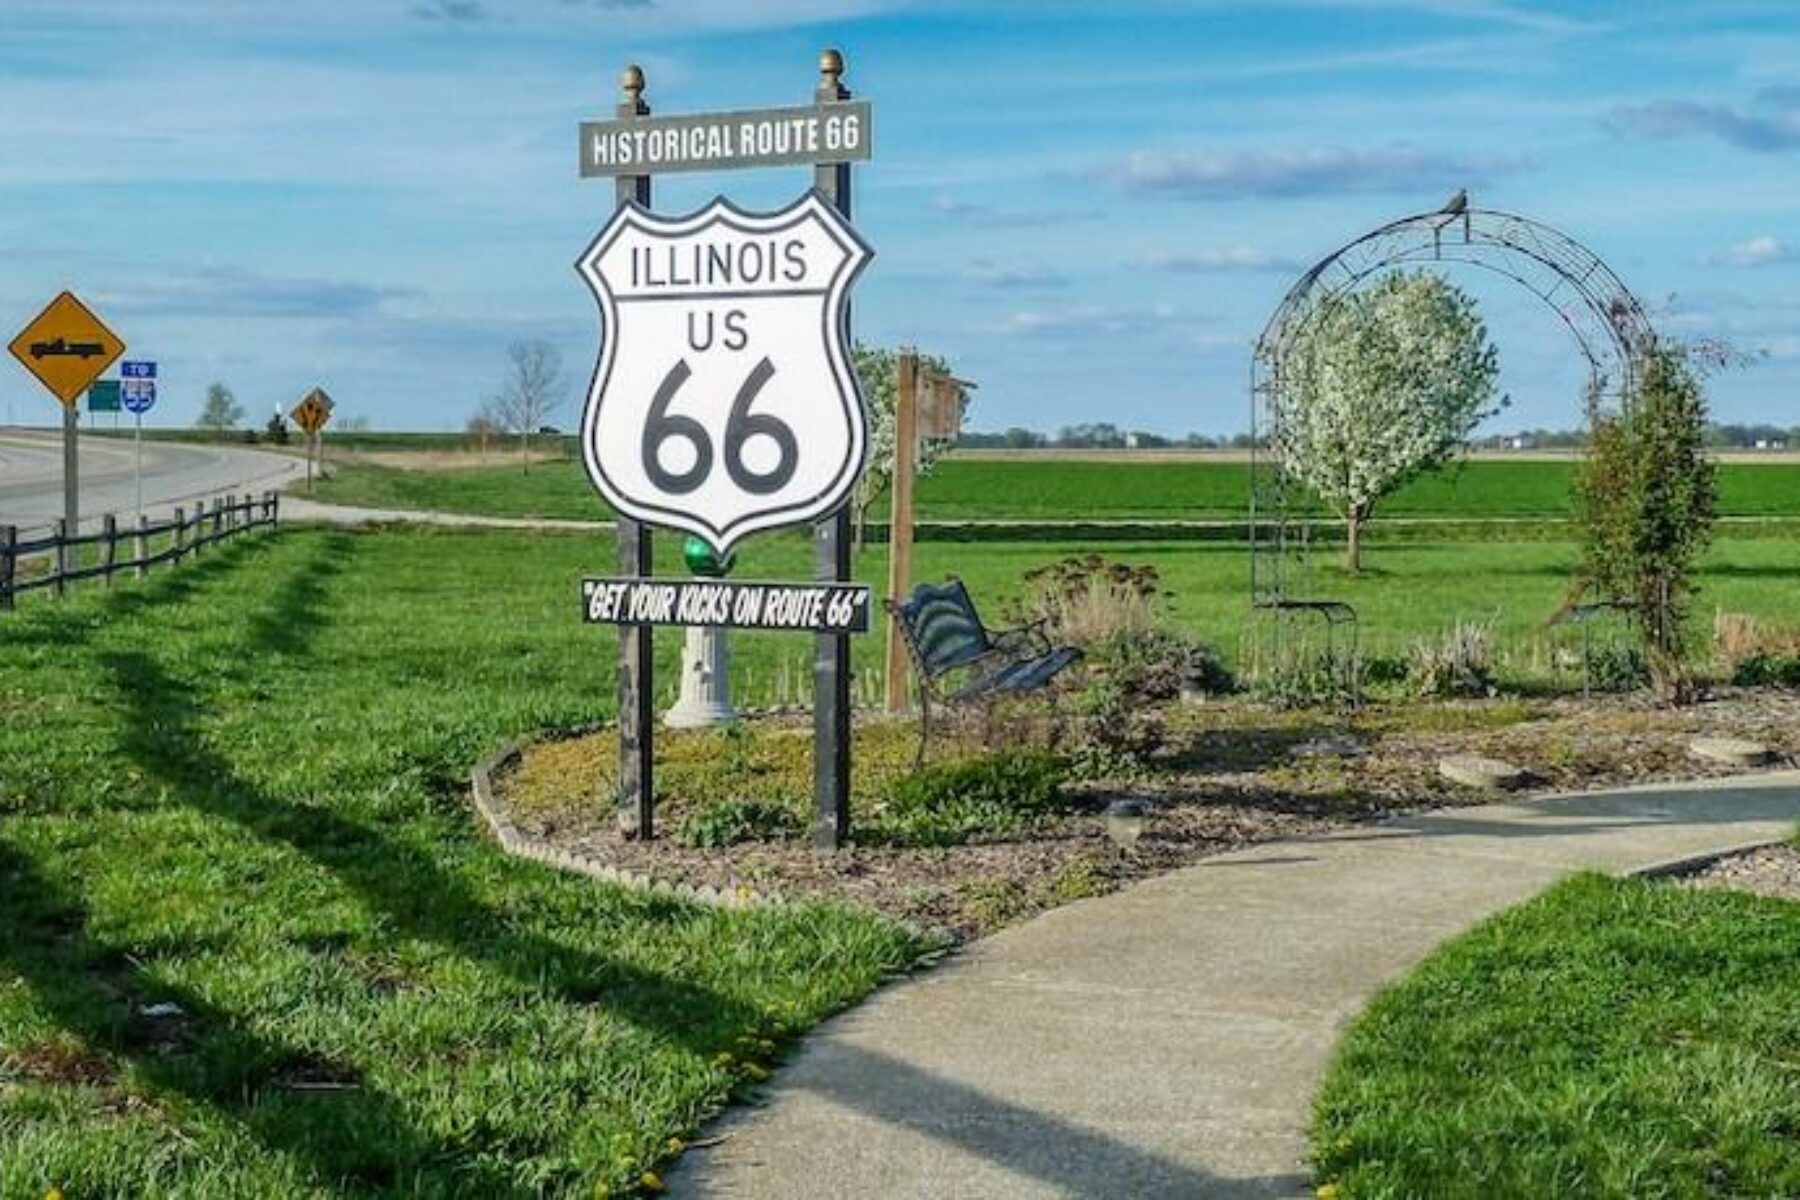 The Historic Route 66 sign | Photo courtesy iStock by Getty Images